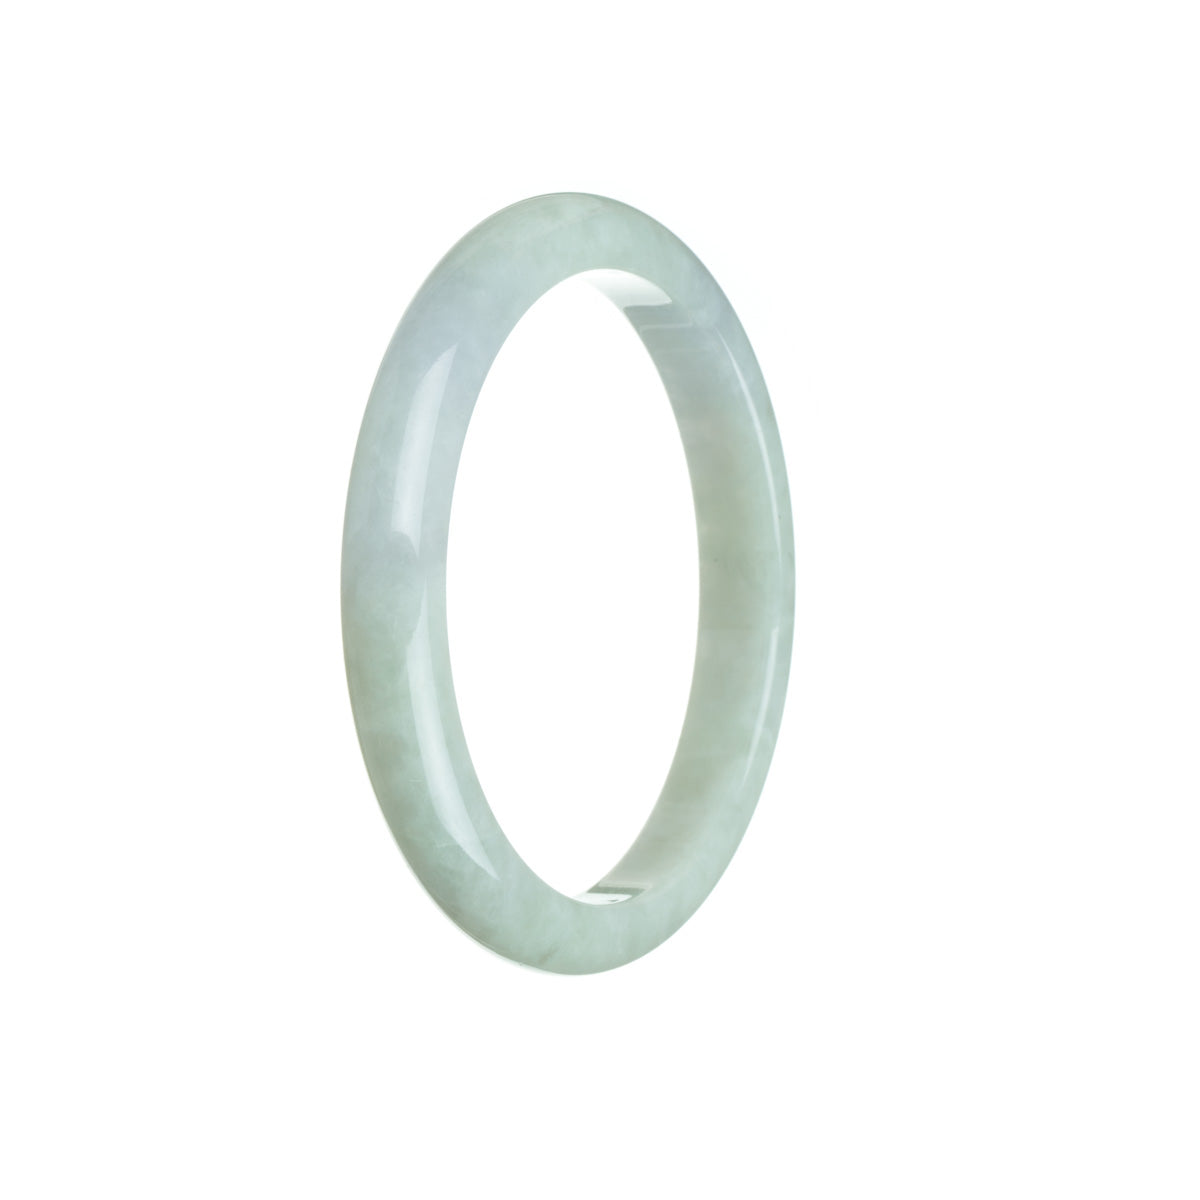 A beautiful pale green jade bracelet with a semi-round shape, measuring 56mm. Made with genuine Grade A jade by MAYS™.